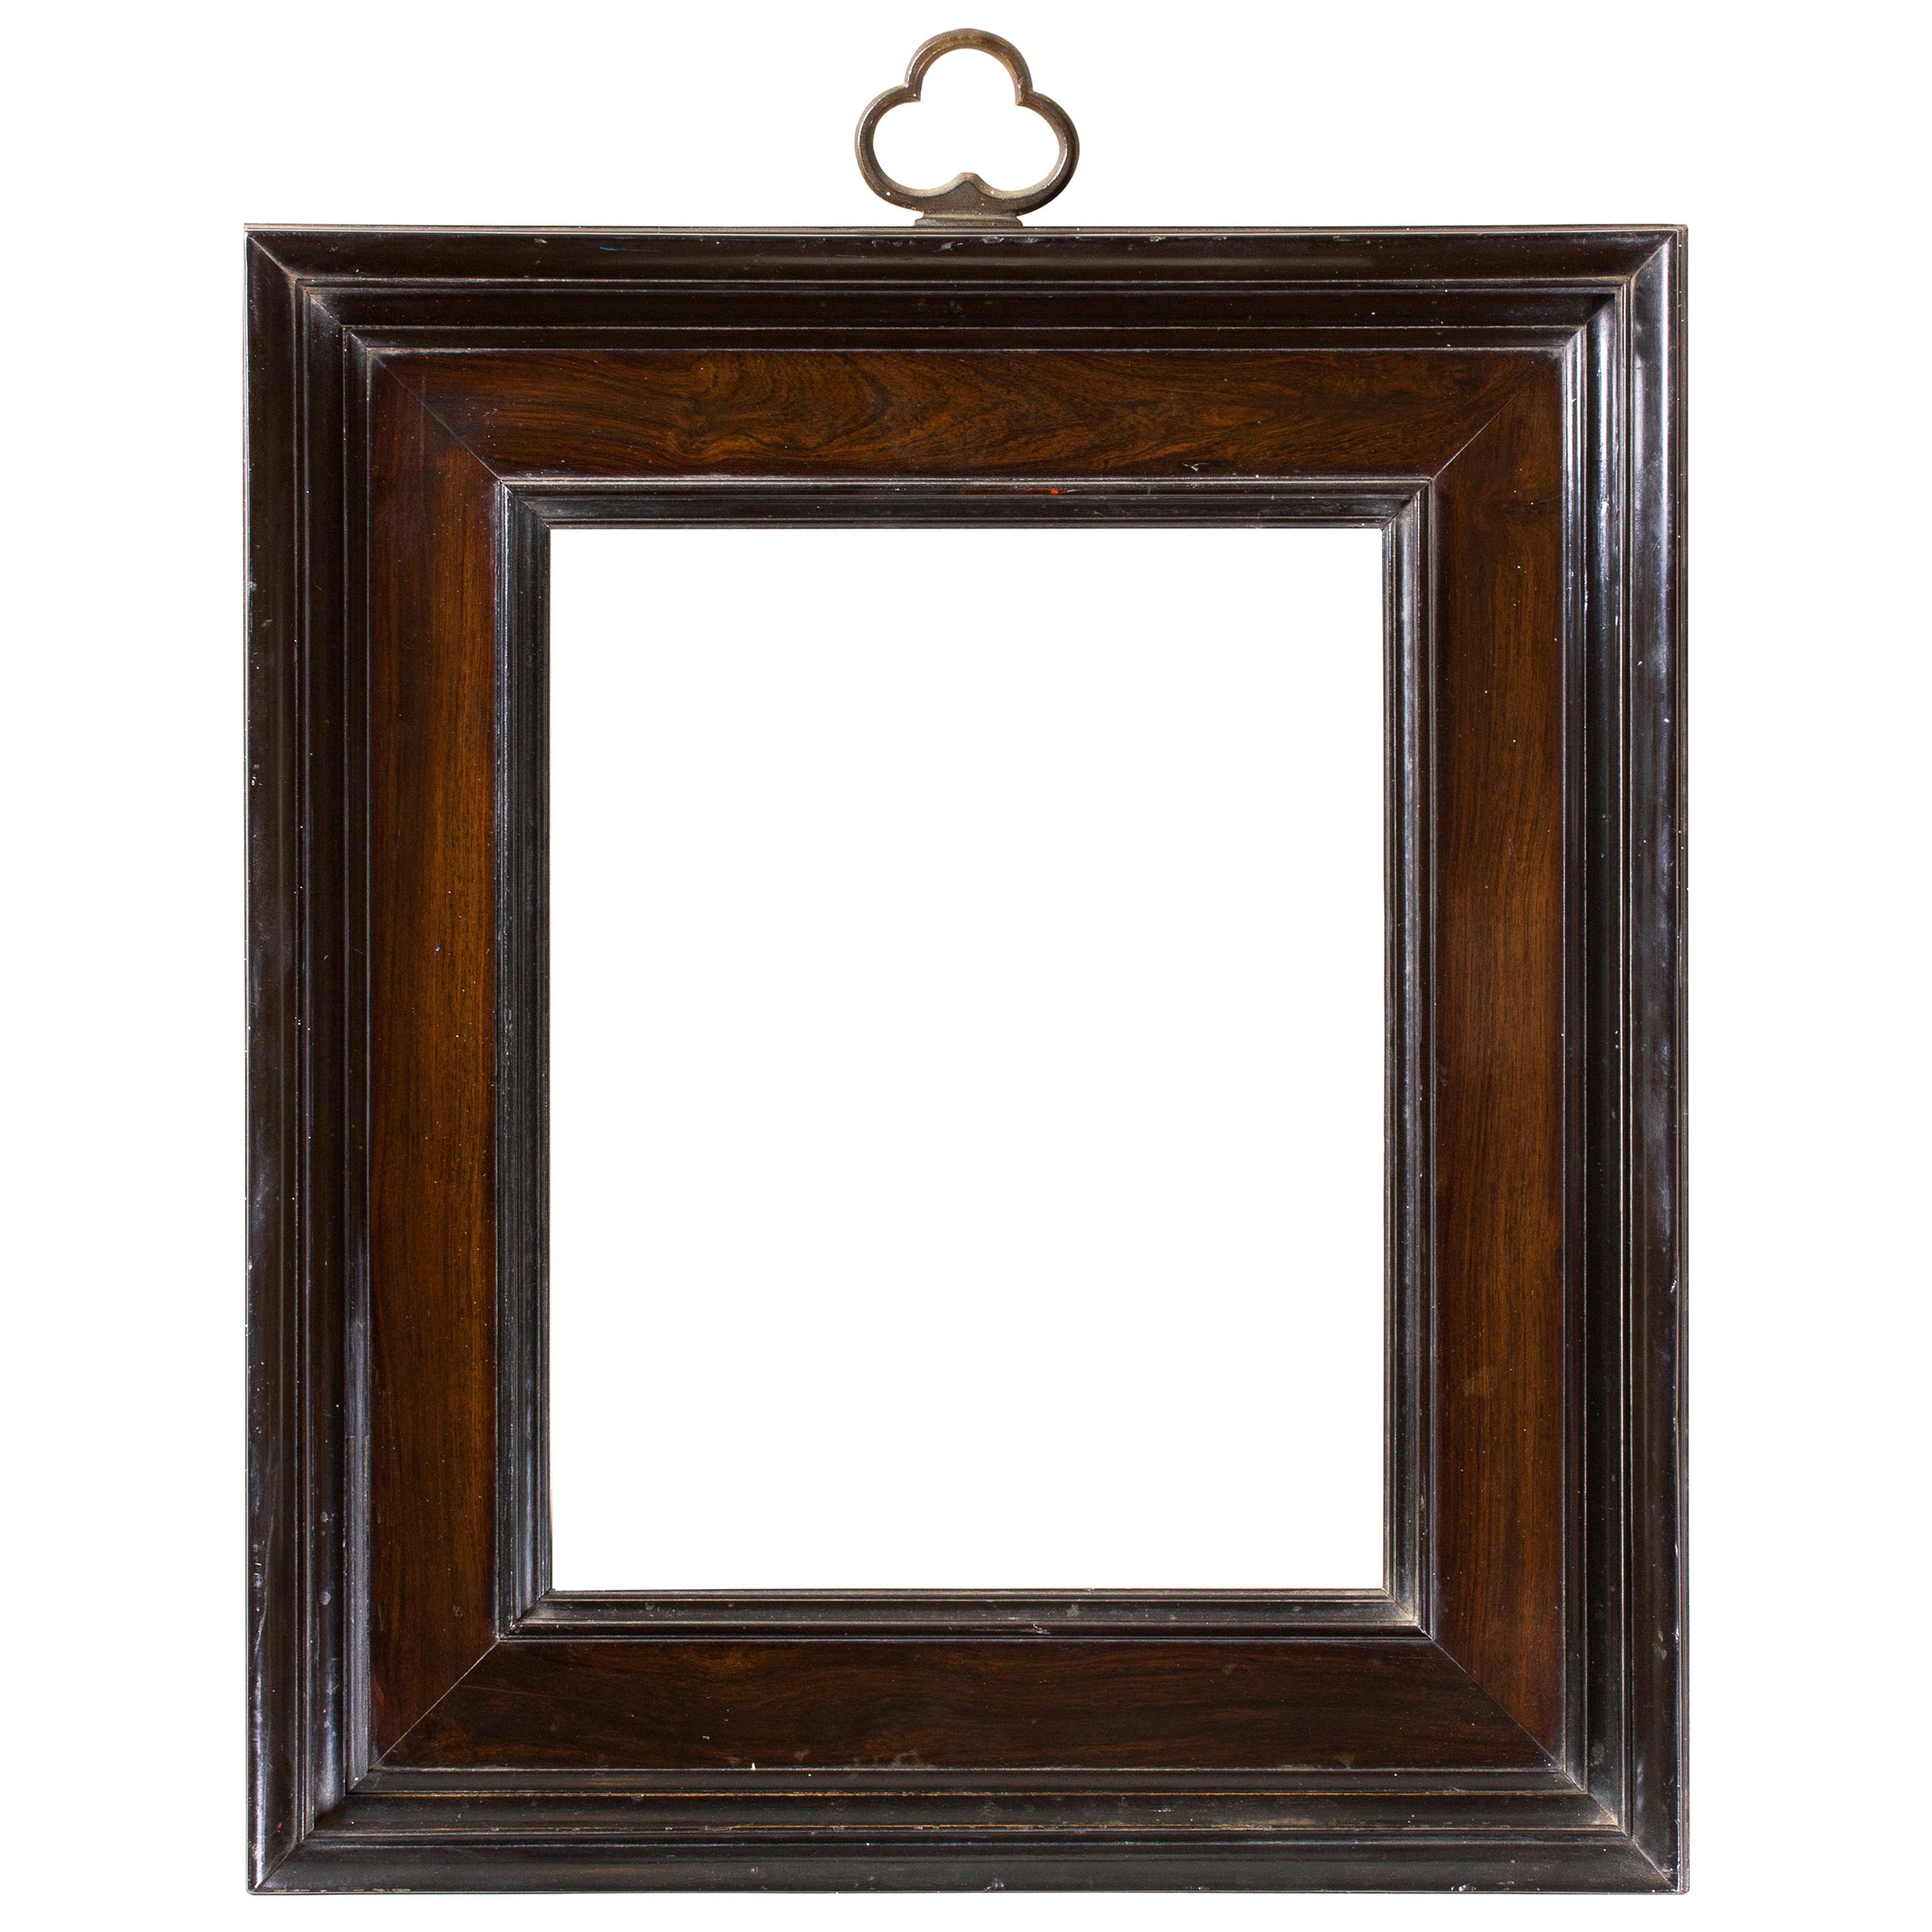 Flanders Frame, Late 16th-Early 17th Century